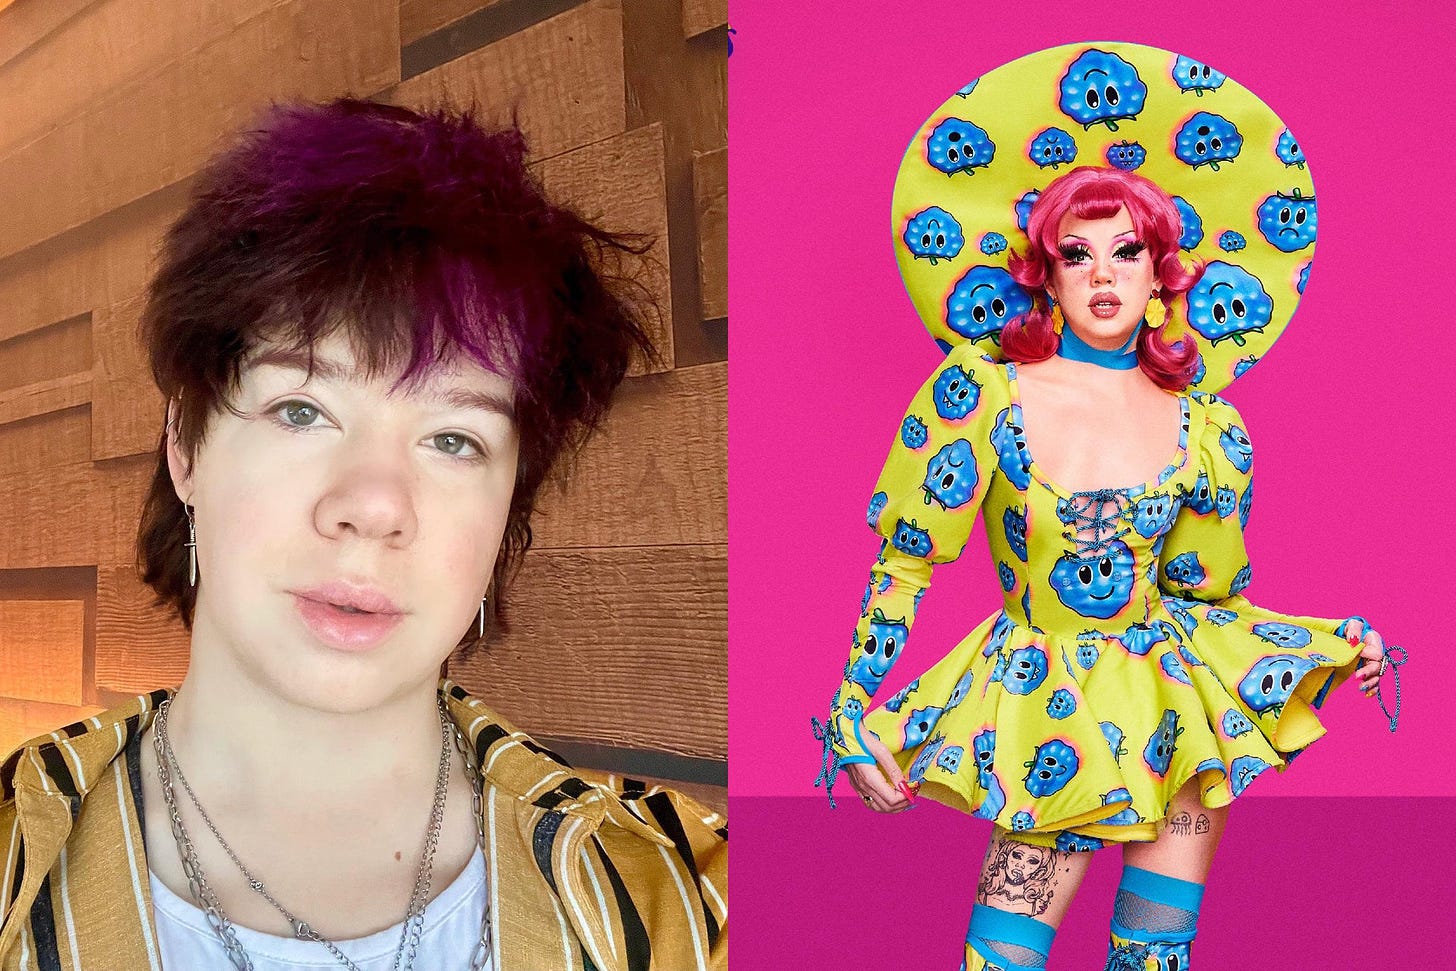 Two images of Willow Pill: Out of drag, they are a young-looking, fair-faced enby with dark purple hair. In drag, they are a bombshell in a yellow and blue patterned outfit with smiling blue raspberries.